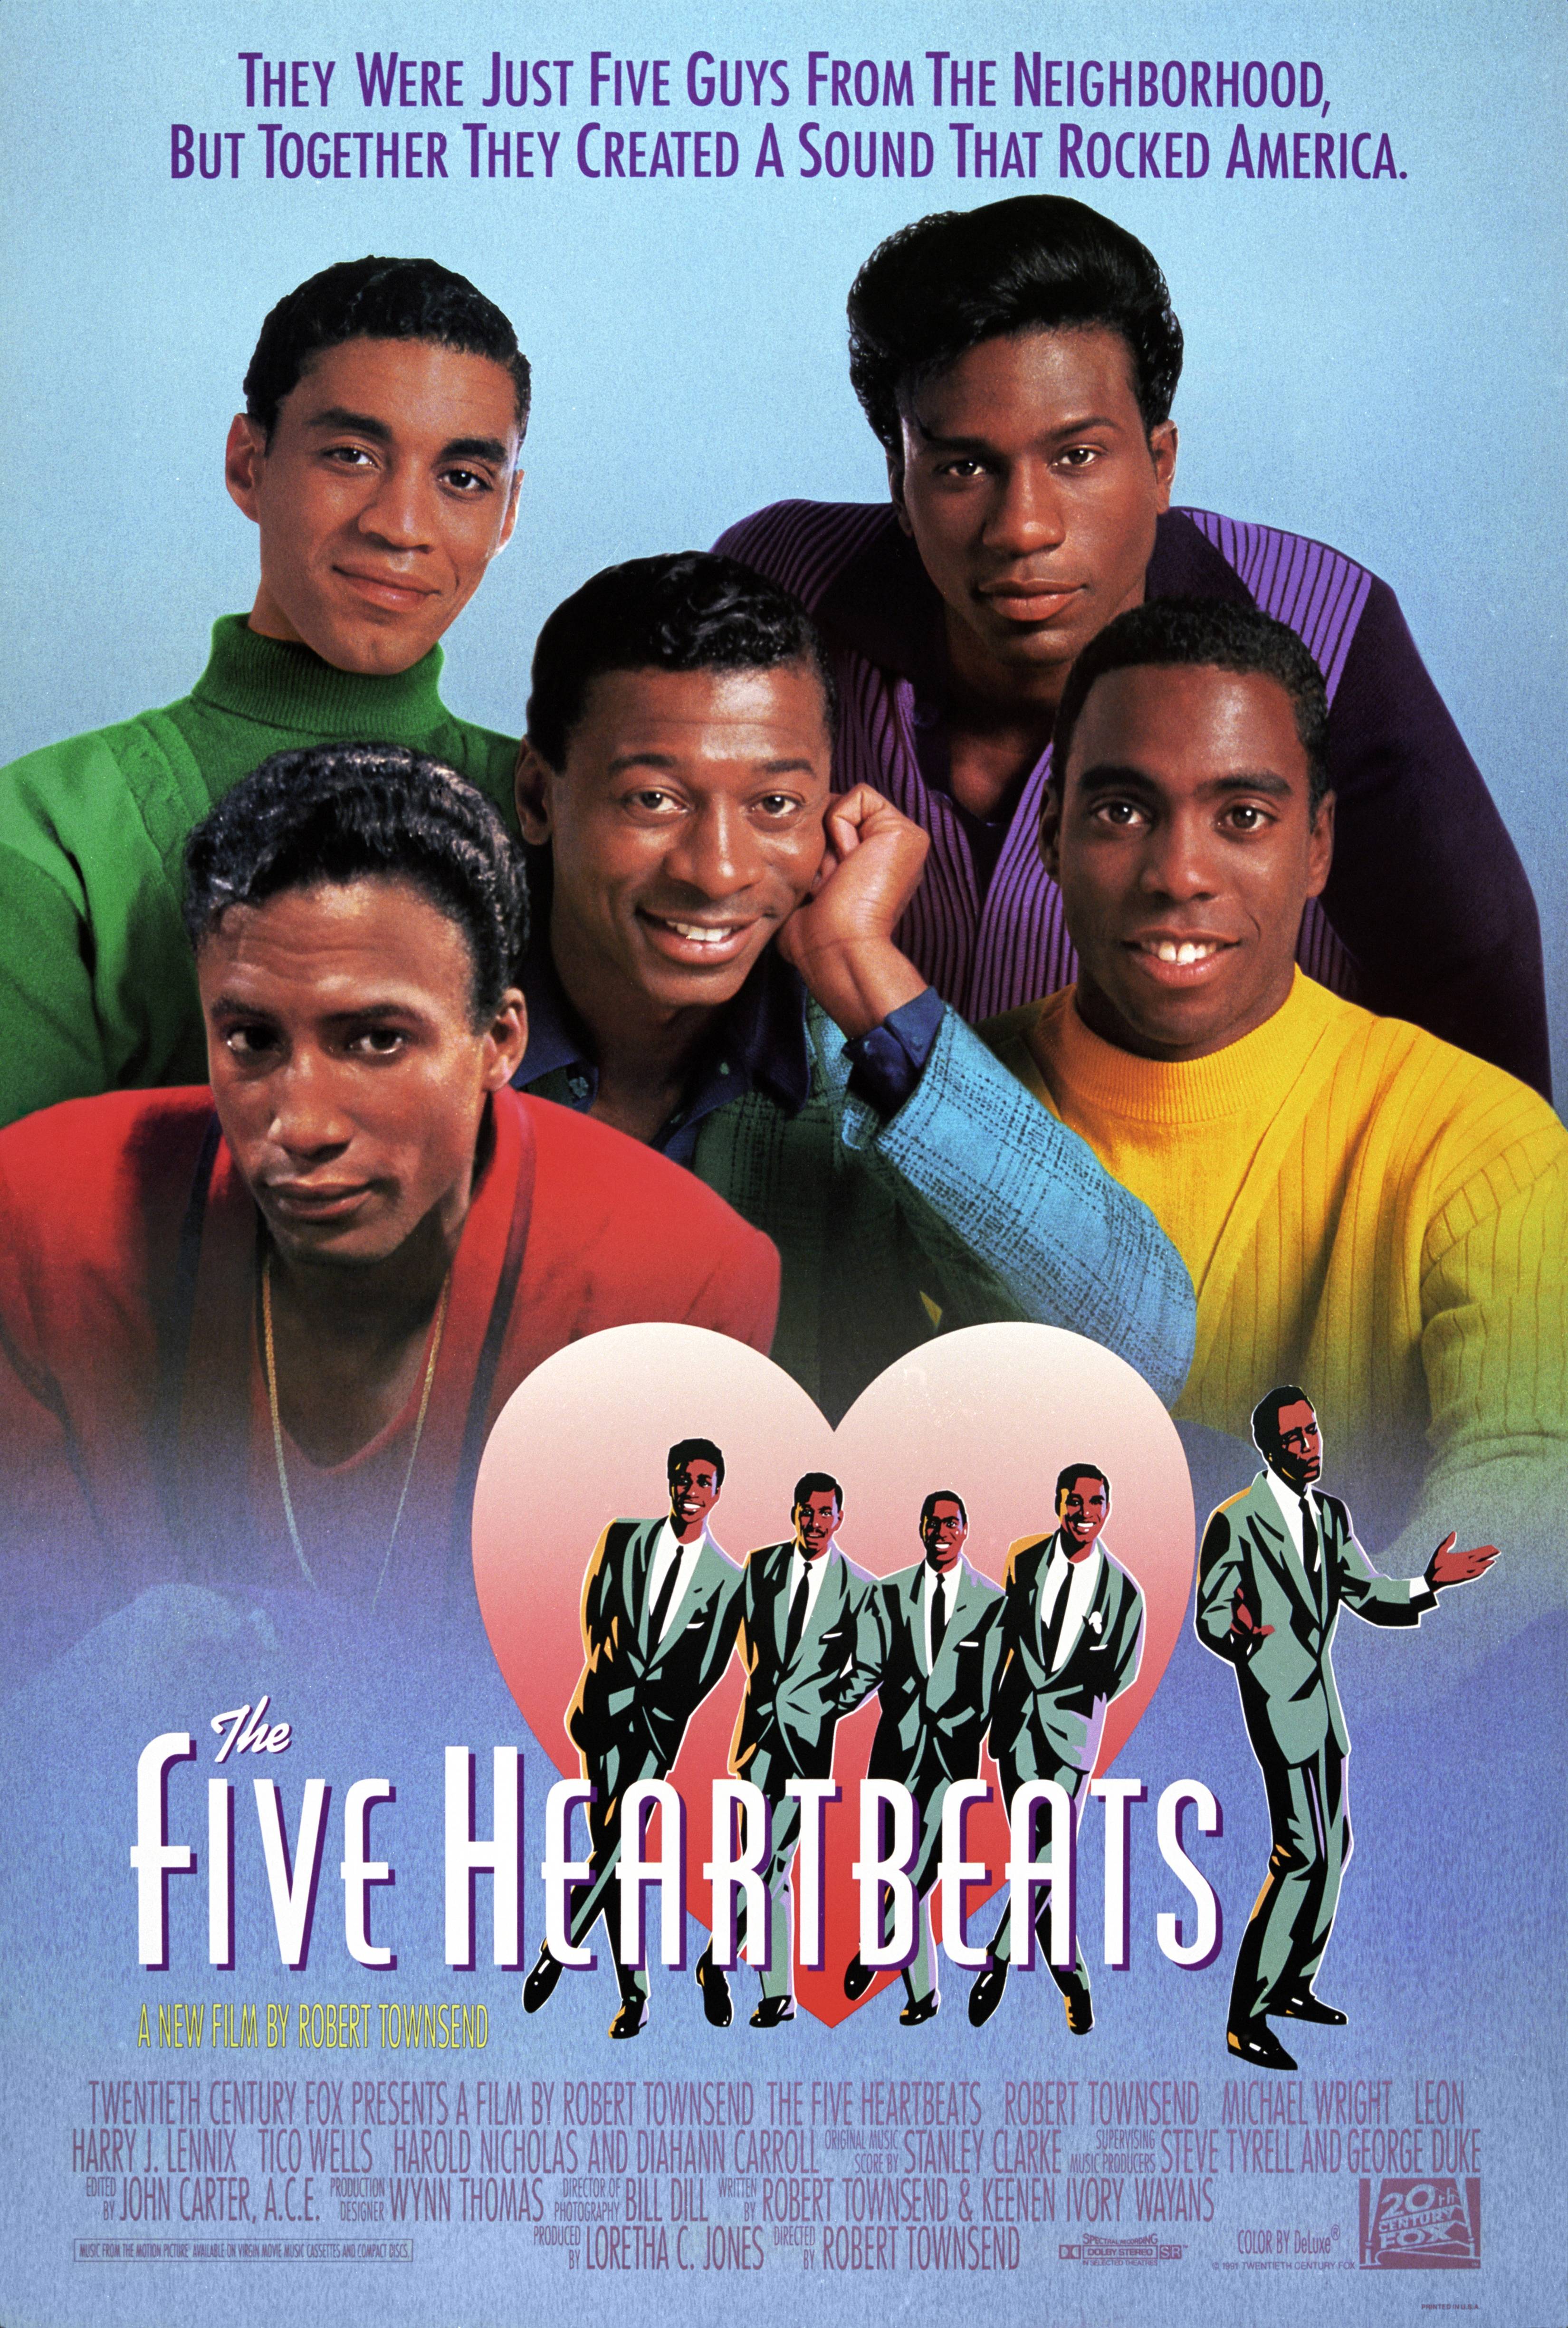 The Five Heartbeats (1991) - Carroll played a groupie in this film about a fictional R&amp;B group, loosely based of the lives of several real-life artists including The Temptations, James Brown, Sam Cooke&nbsp;and others. Carroll played Eleanor Potter, one of the original supporters of the group.&nbsp;(Photo: John D. Kisch/Separate Cinema Archive/Getty Images)